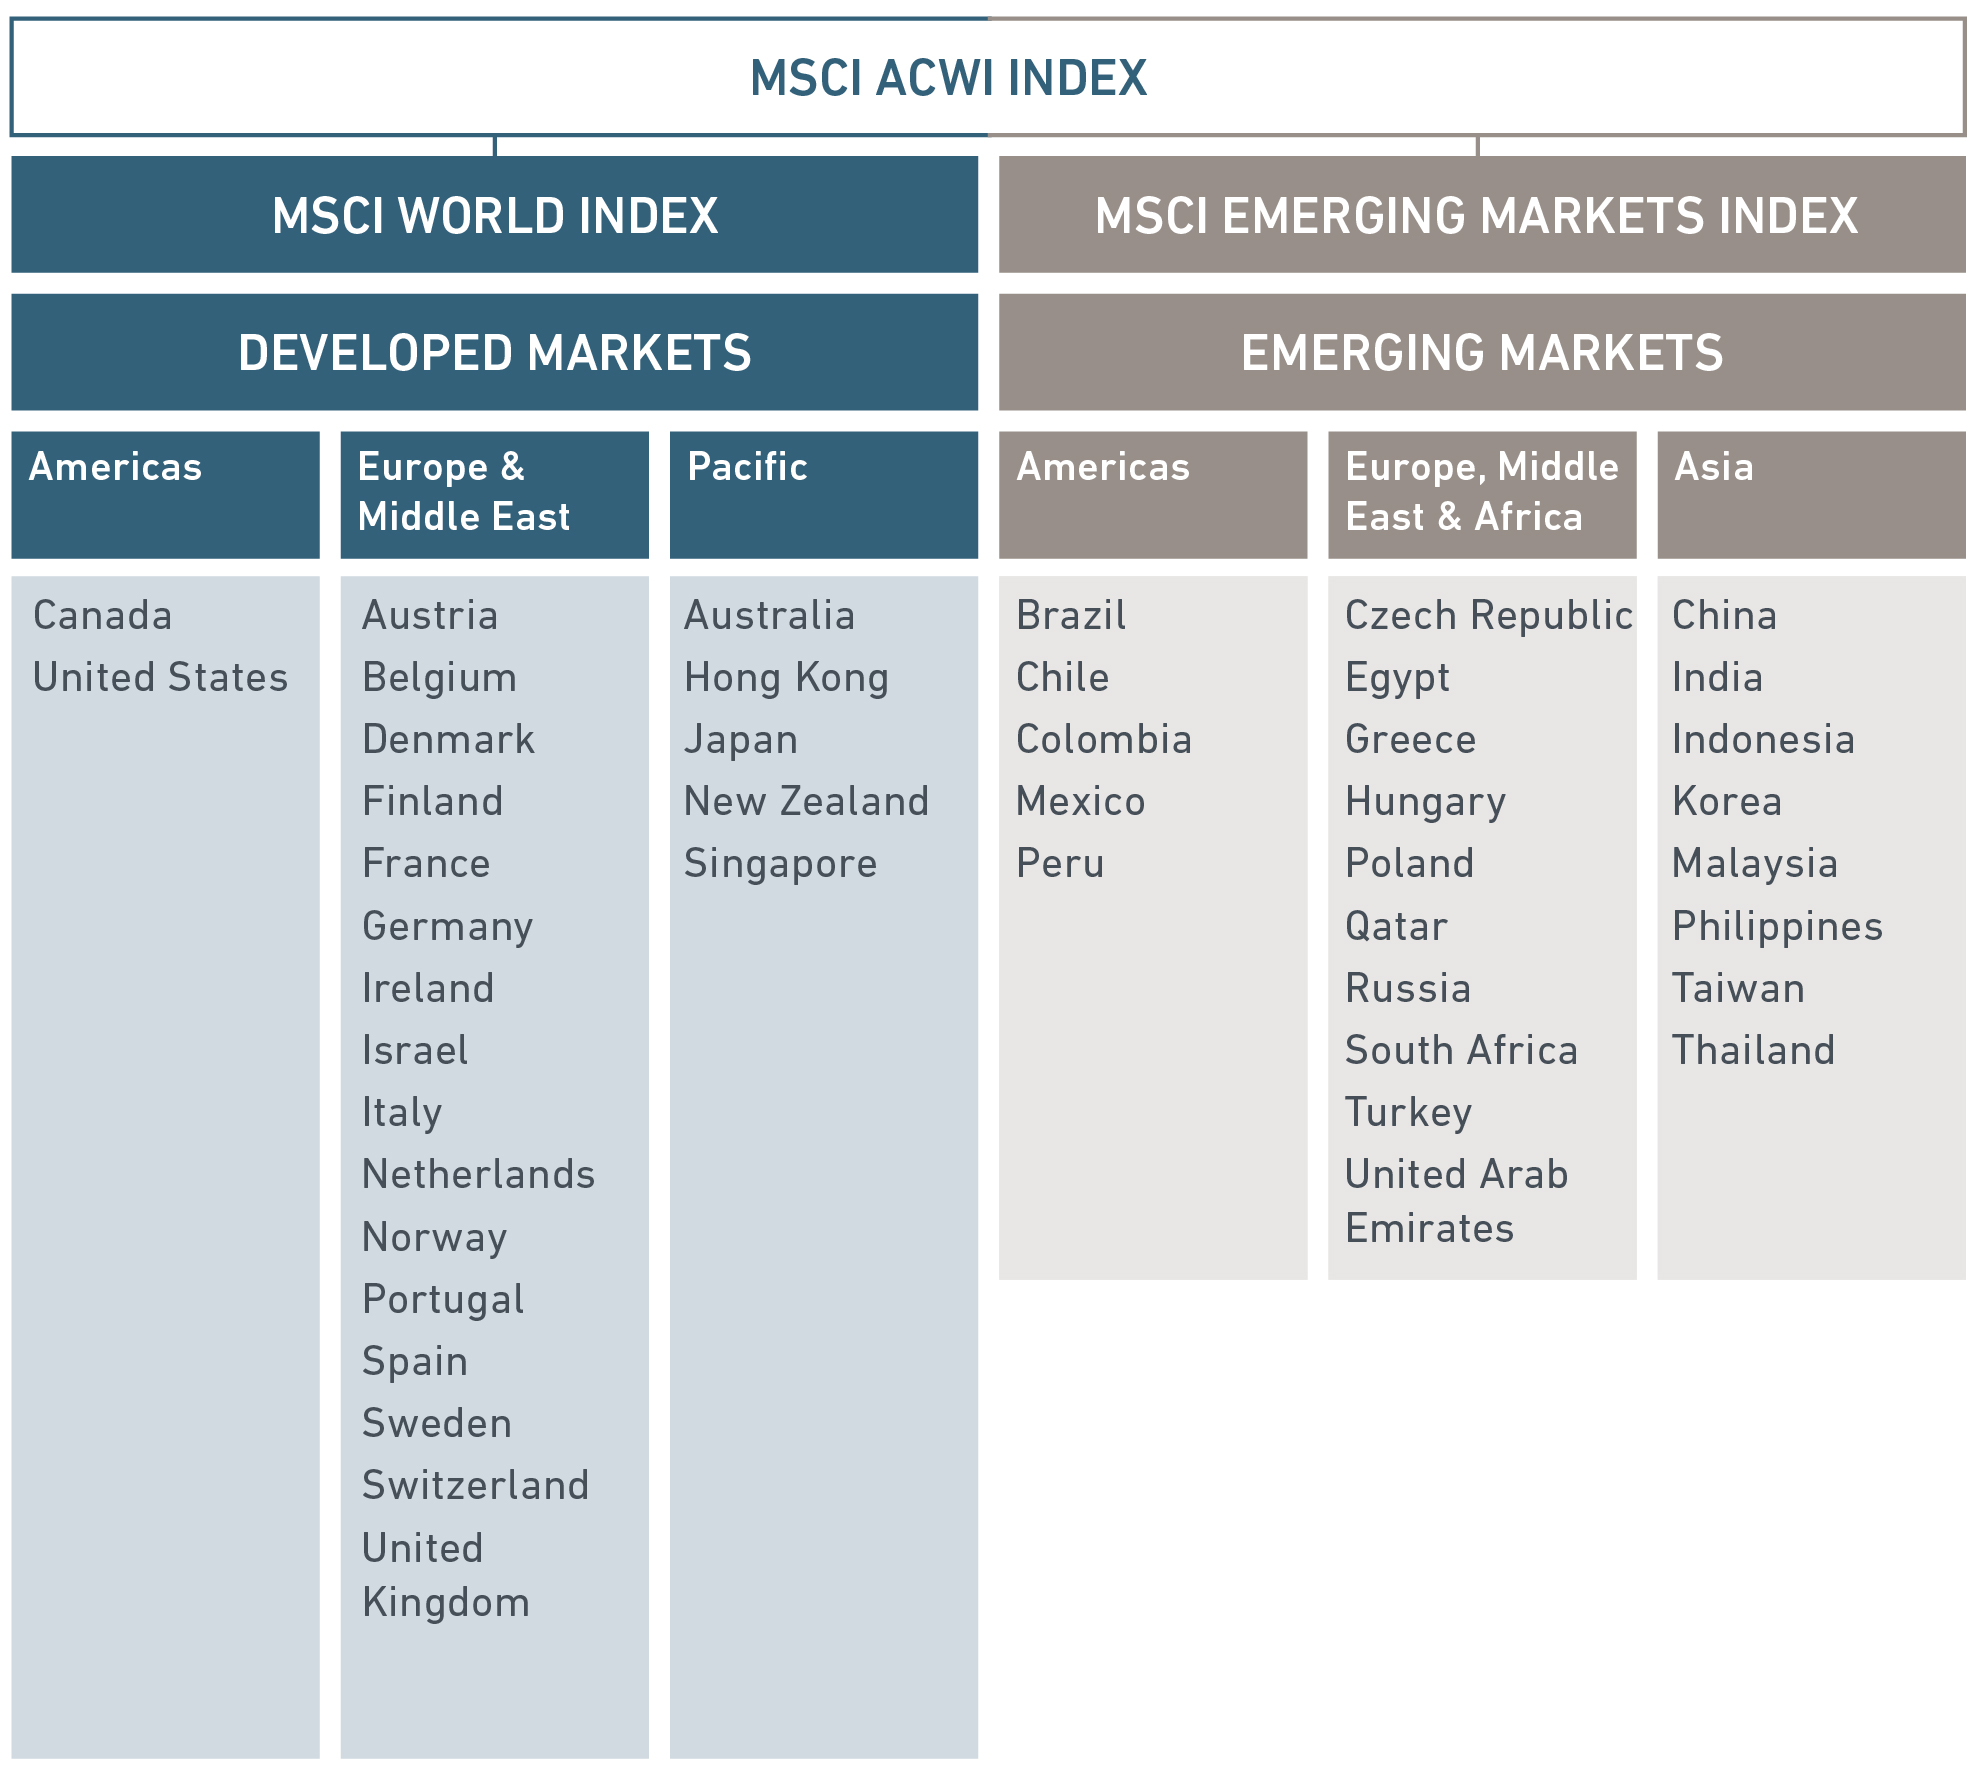 msci global emerging markets index countries